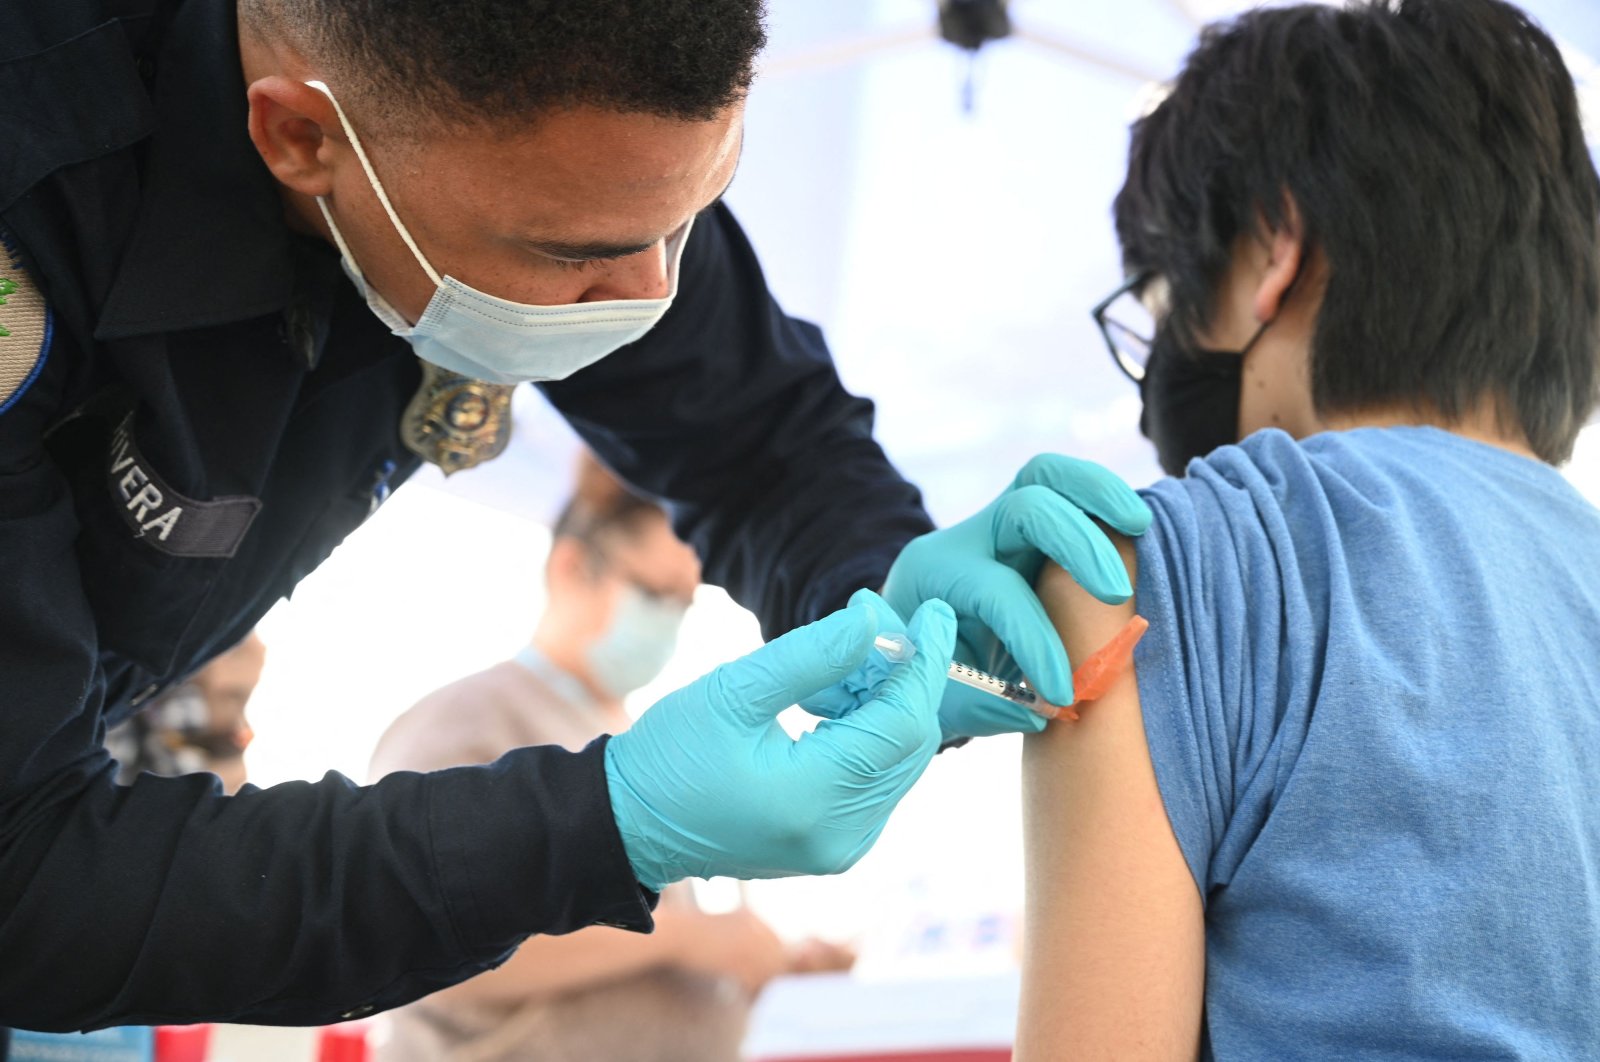 Brandon Rivera, a Los Angeles County emergency medical technician, gives a second dose of Pfizer-BioNTech COVID-19 vaccine to Aaron Delgado, 16, at a pop-up vaccine clinic in the Arleta neighborhood of Los Angeles, California, Aug. 23, 2021. (AFP Photo)